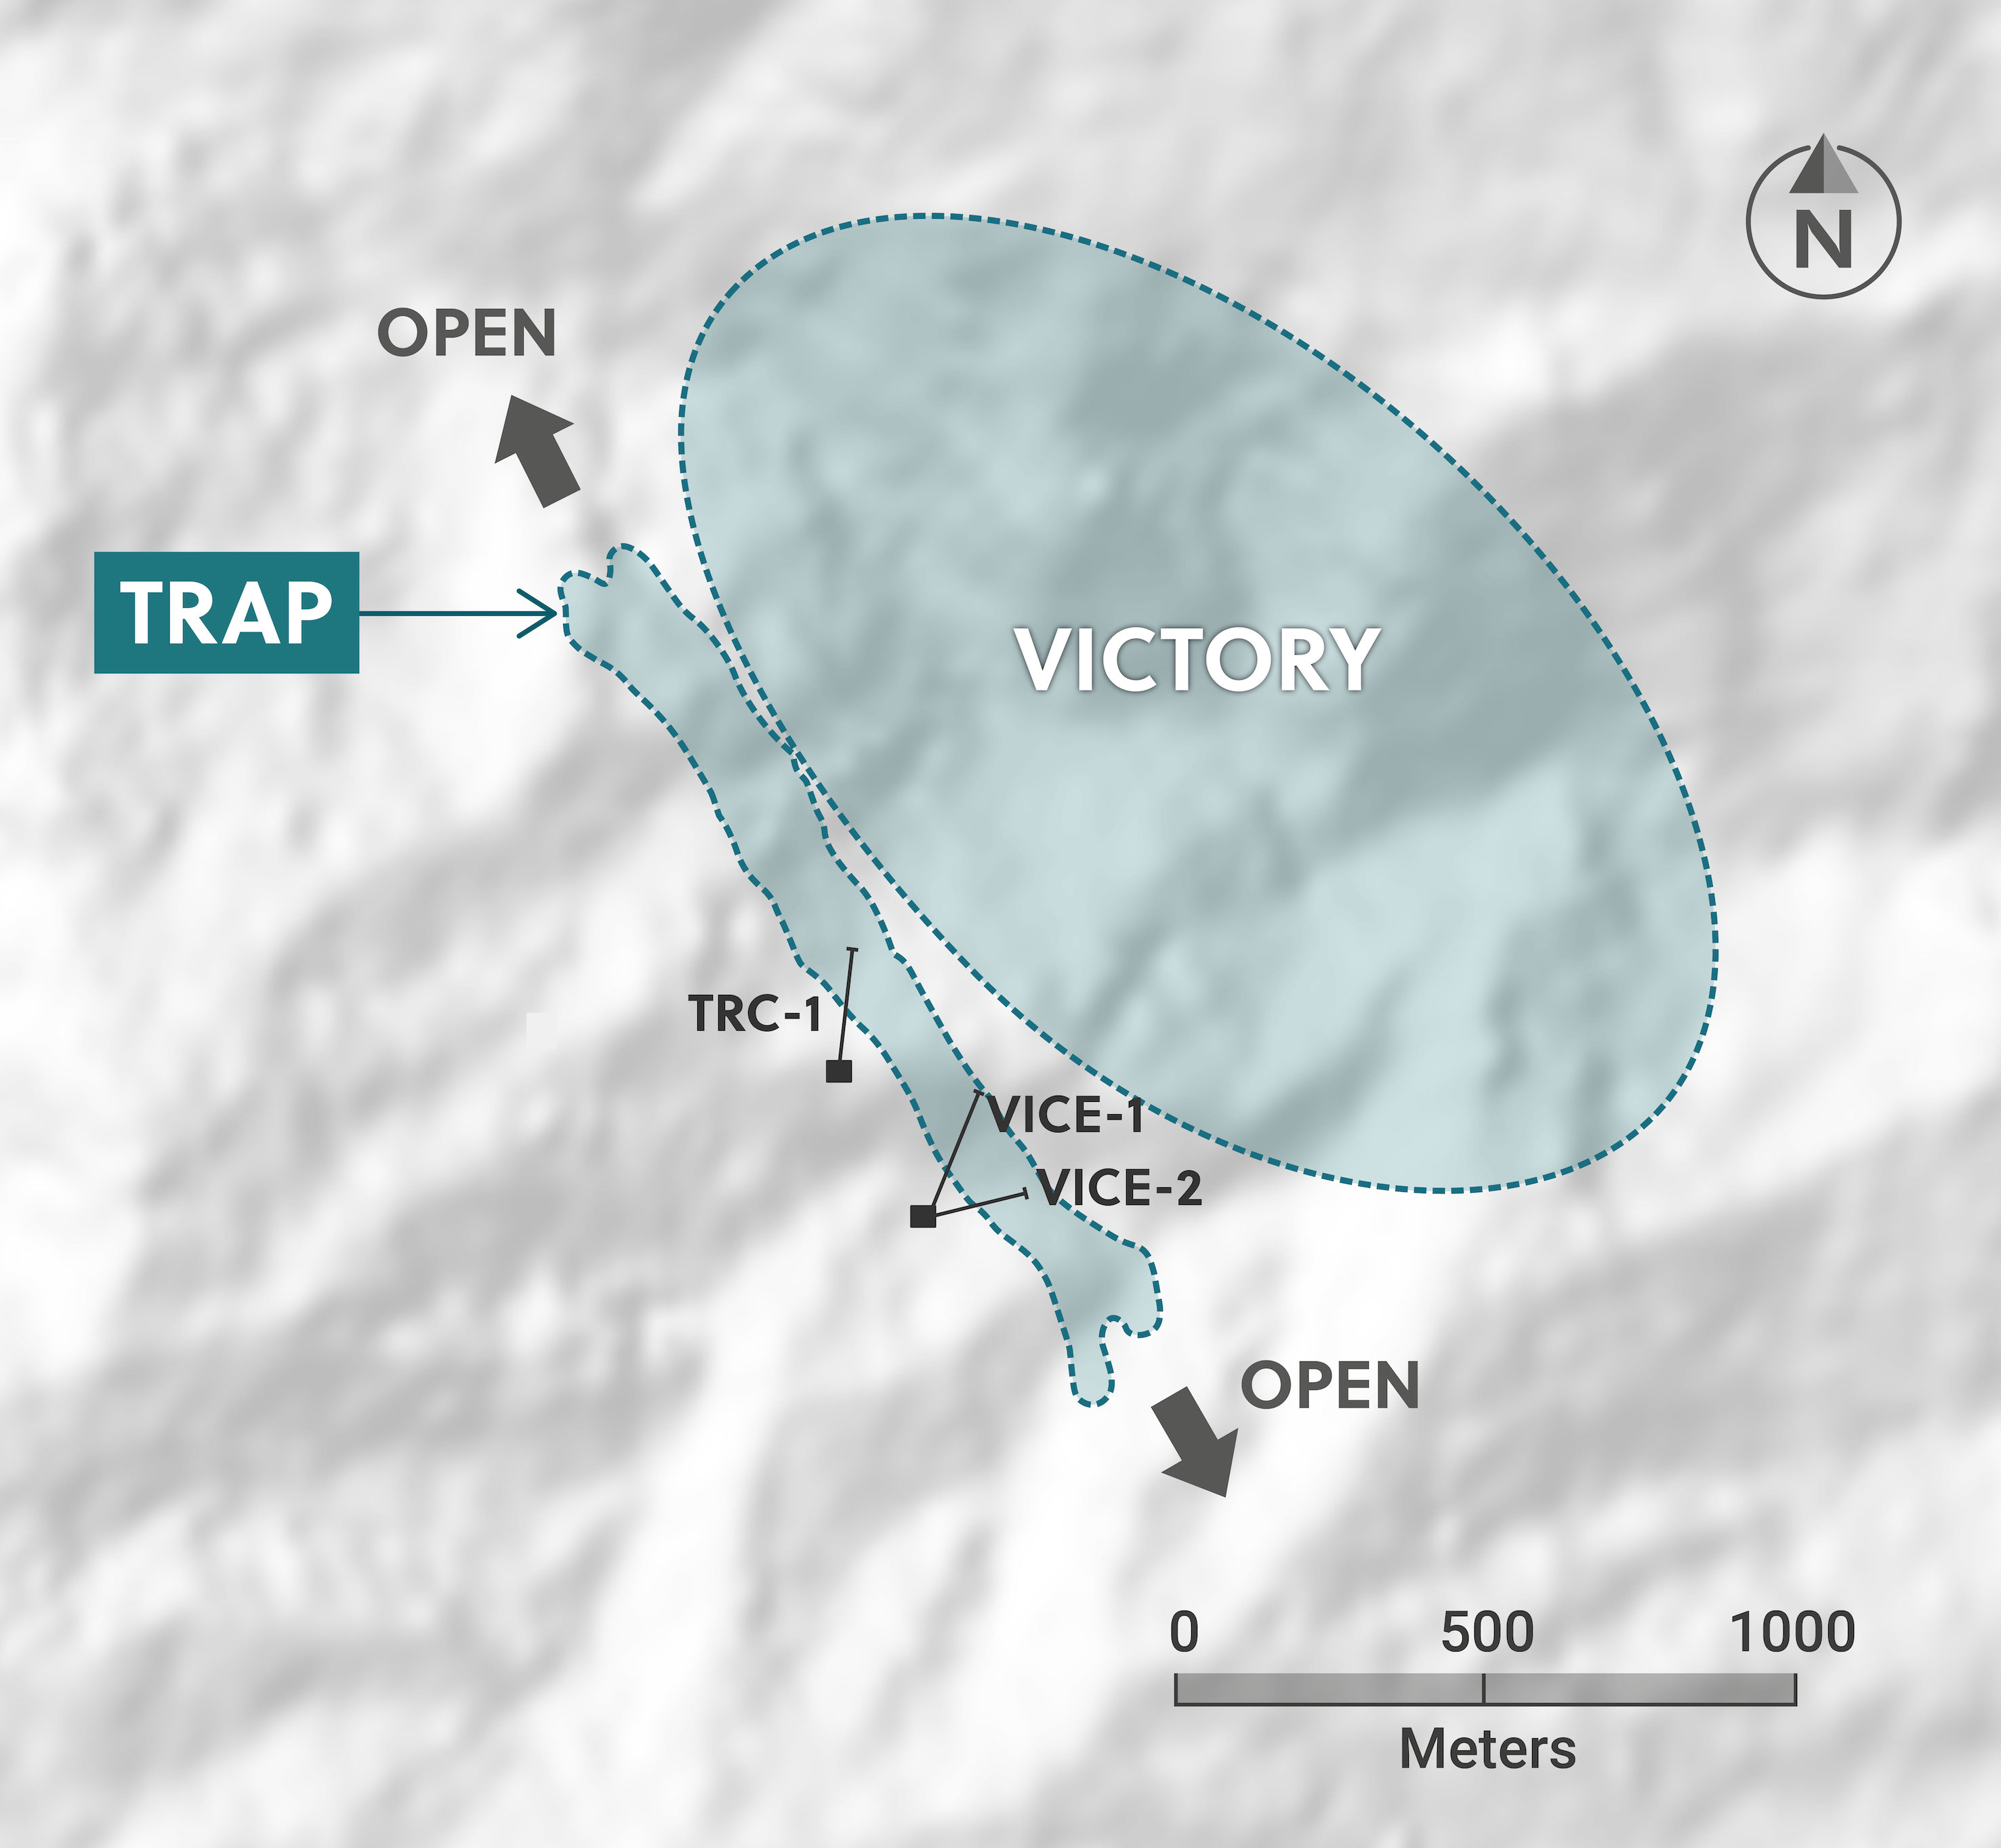 Trap & Victory Targets